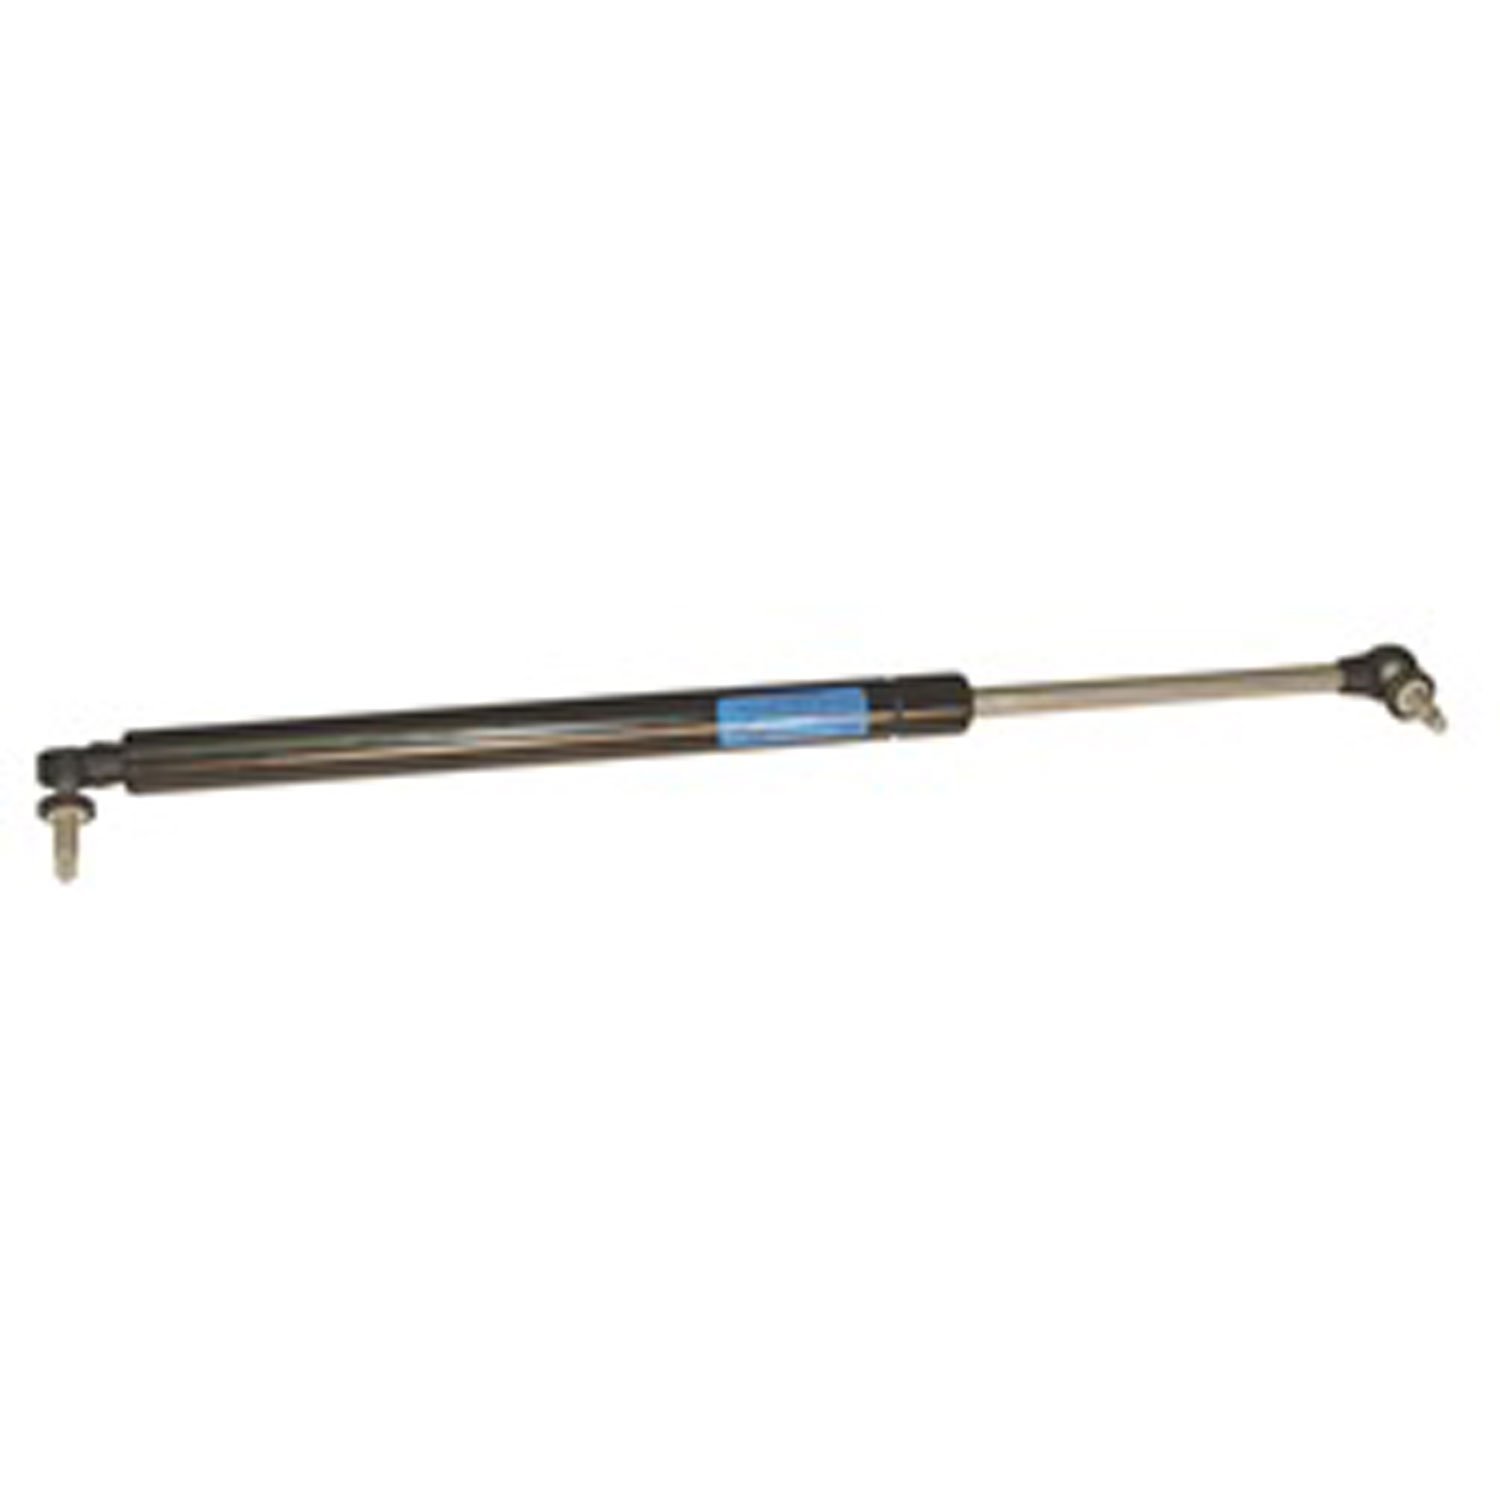 Replacement gas strut from Omix-ADA, Fits liftgate on 99-04 Jeep Grand Cherokee WJ